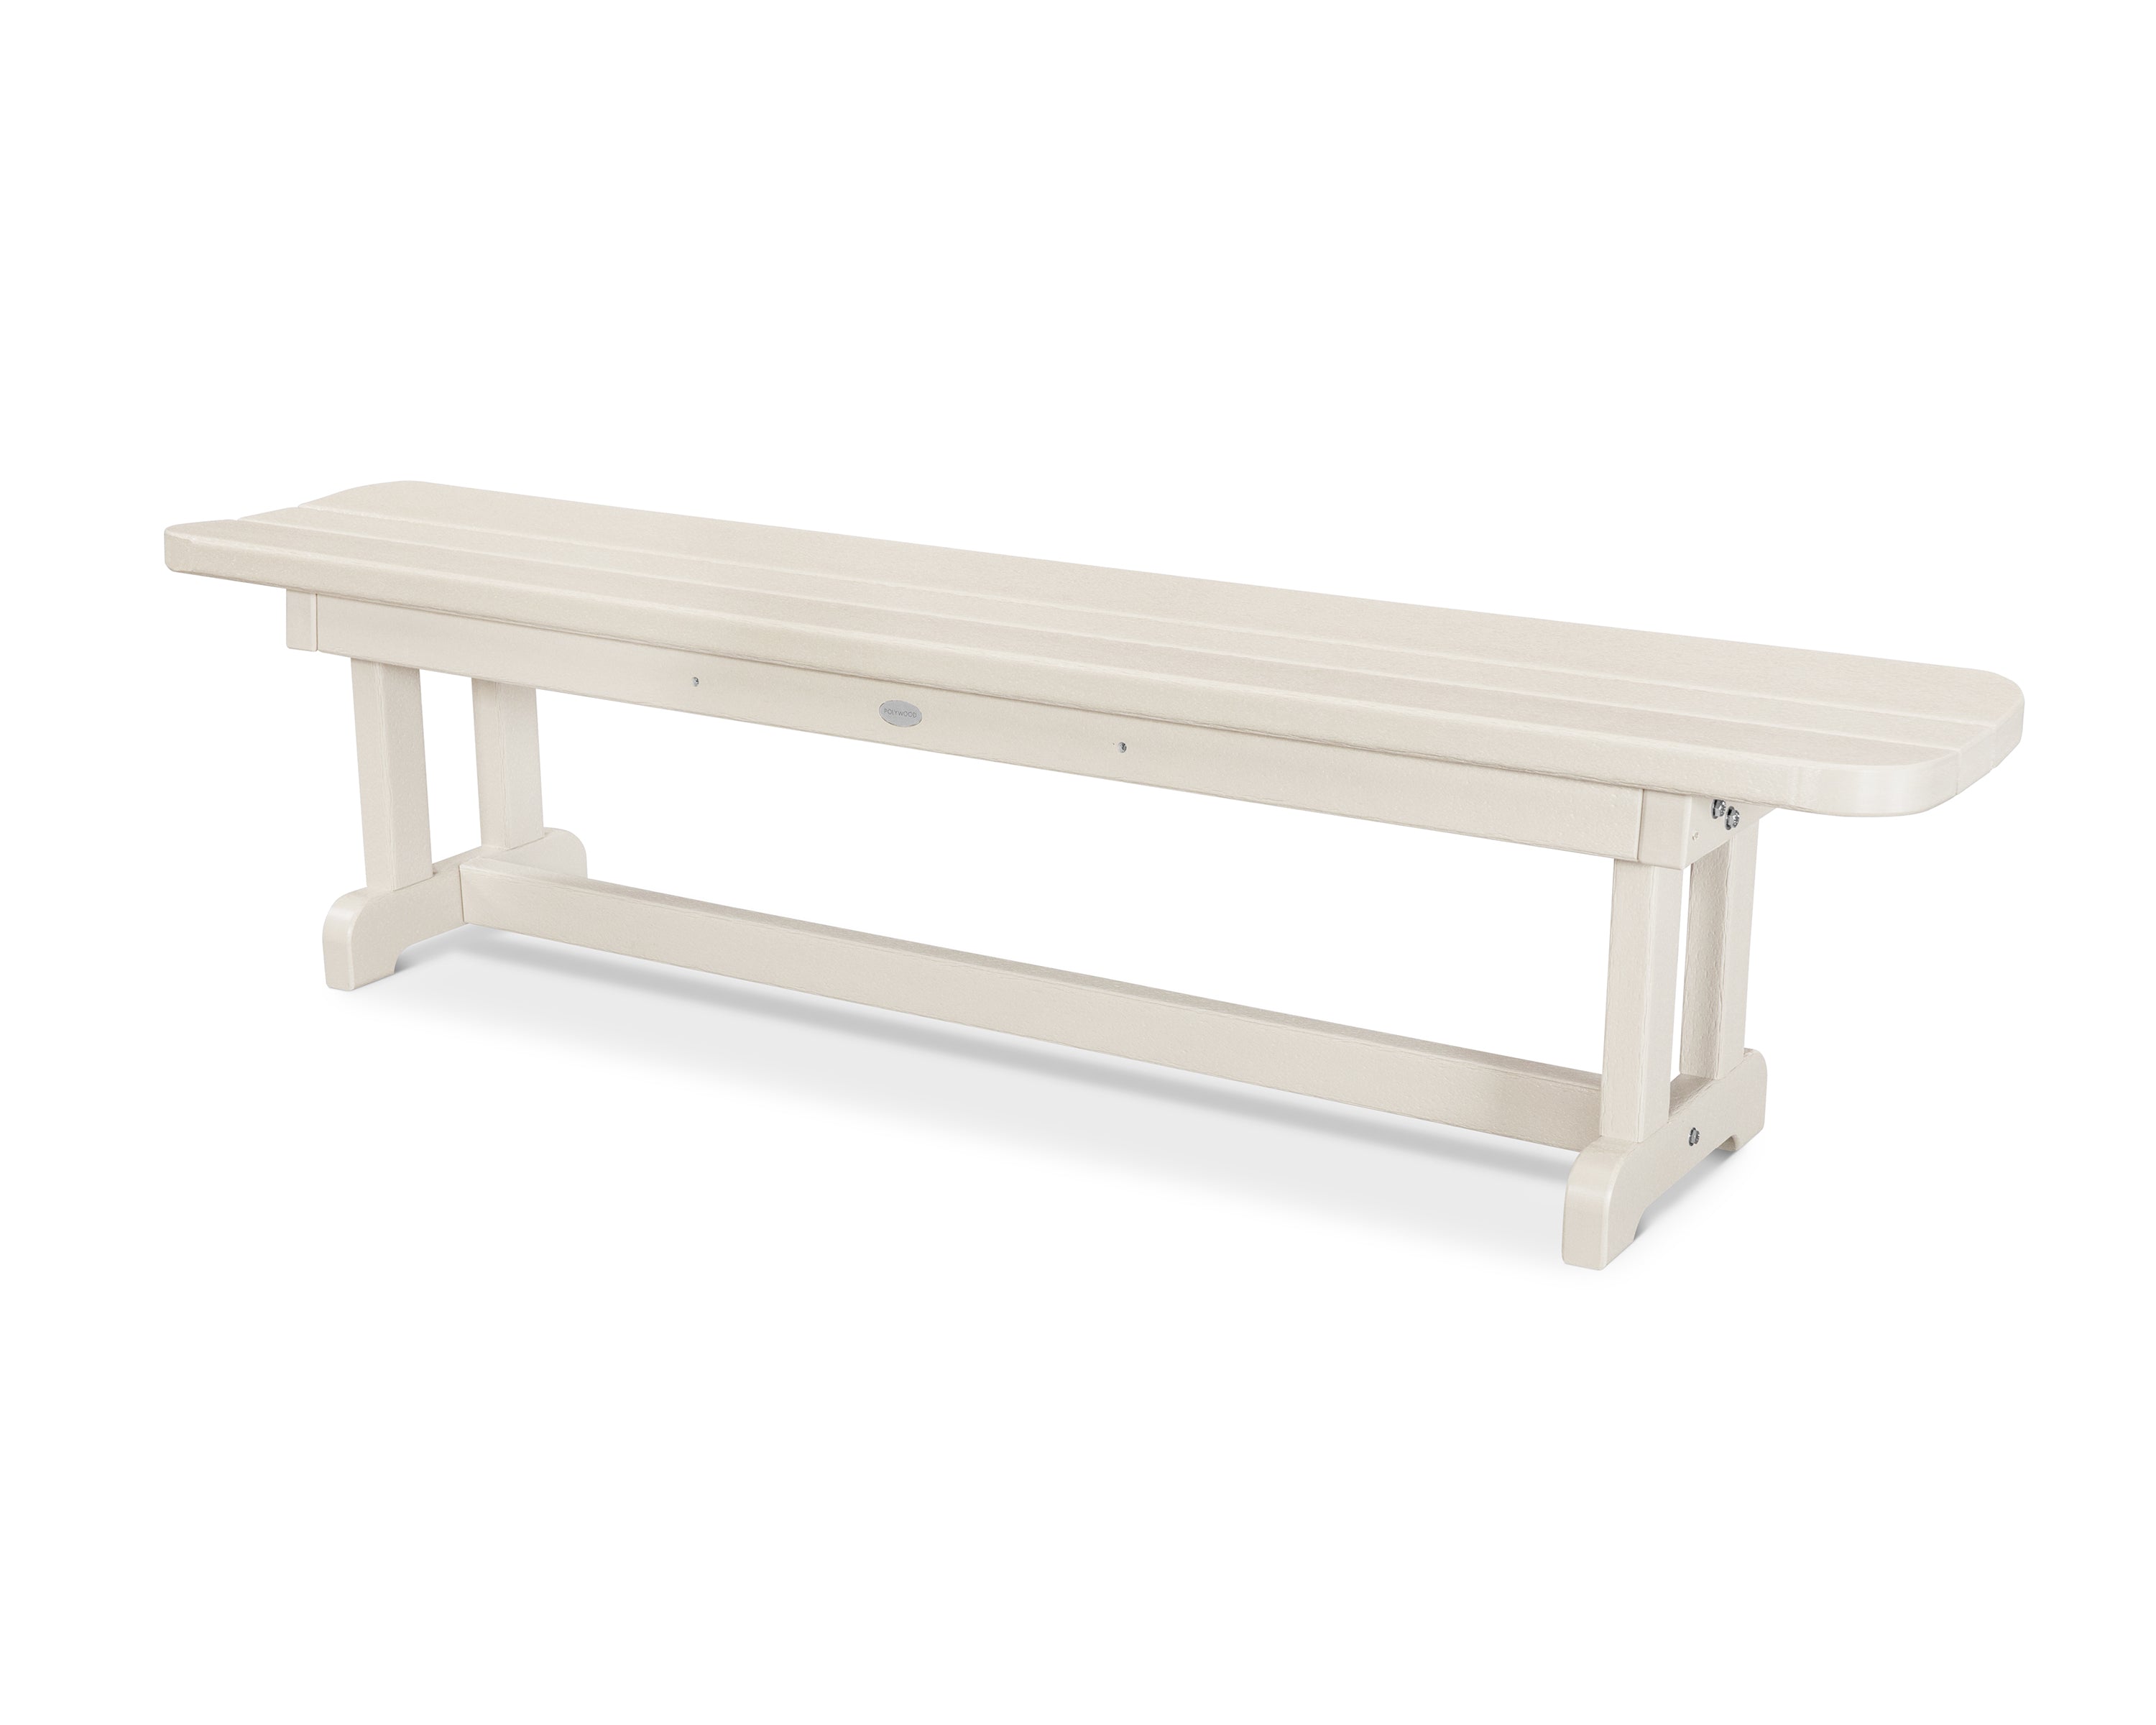 POLYWOOD® Park 72" Harvester Backless Bench in Sand